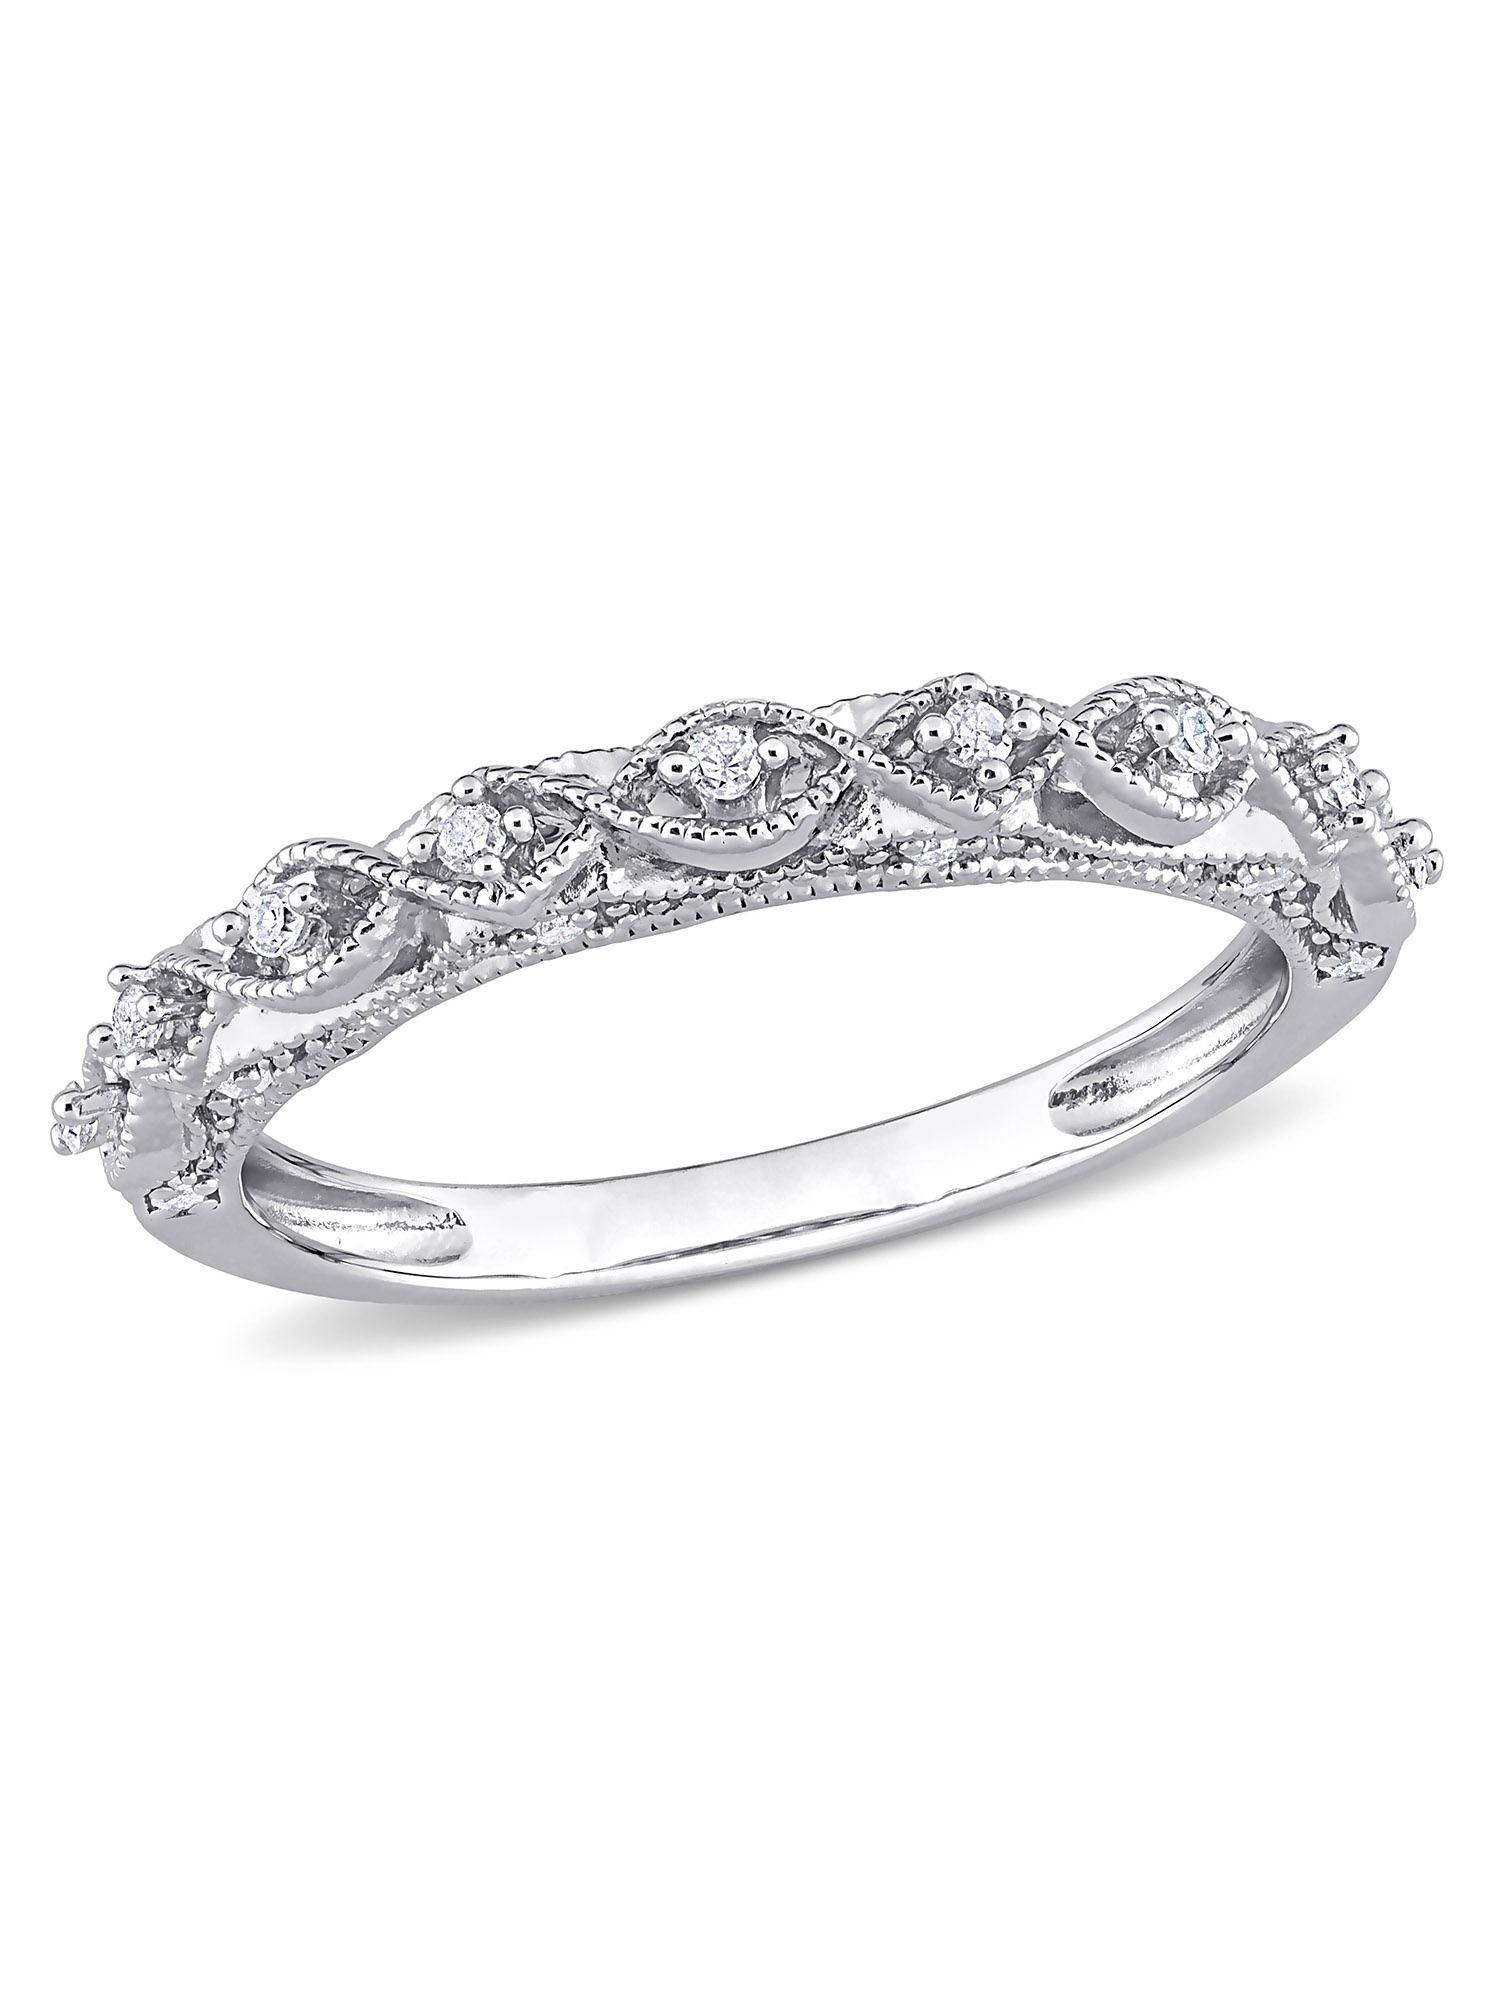 Holiday 1/2 Carat T.W. Certified Diamond Sterling Silver Ring - Walmart.com